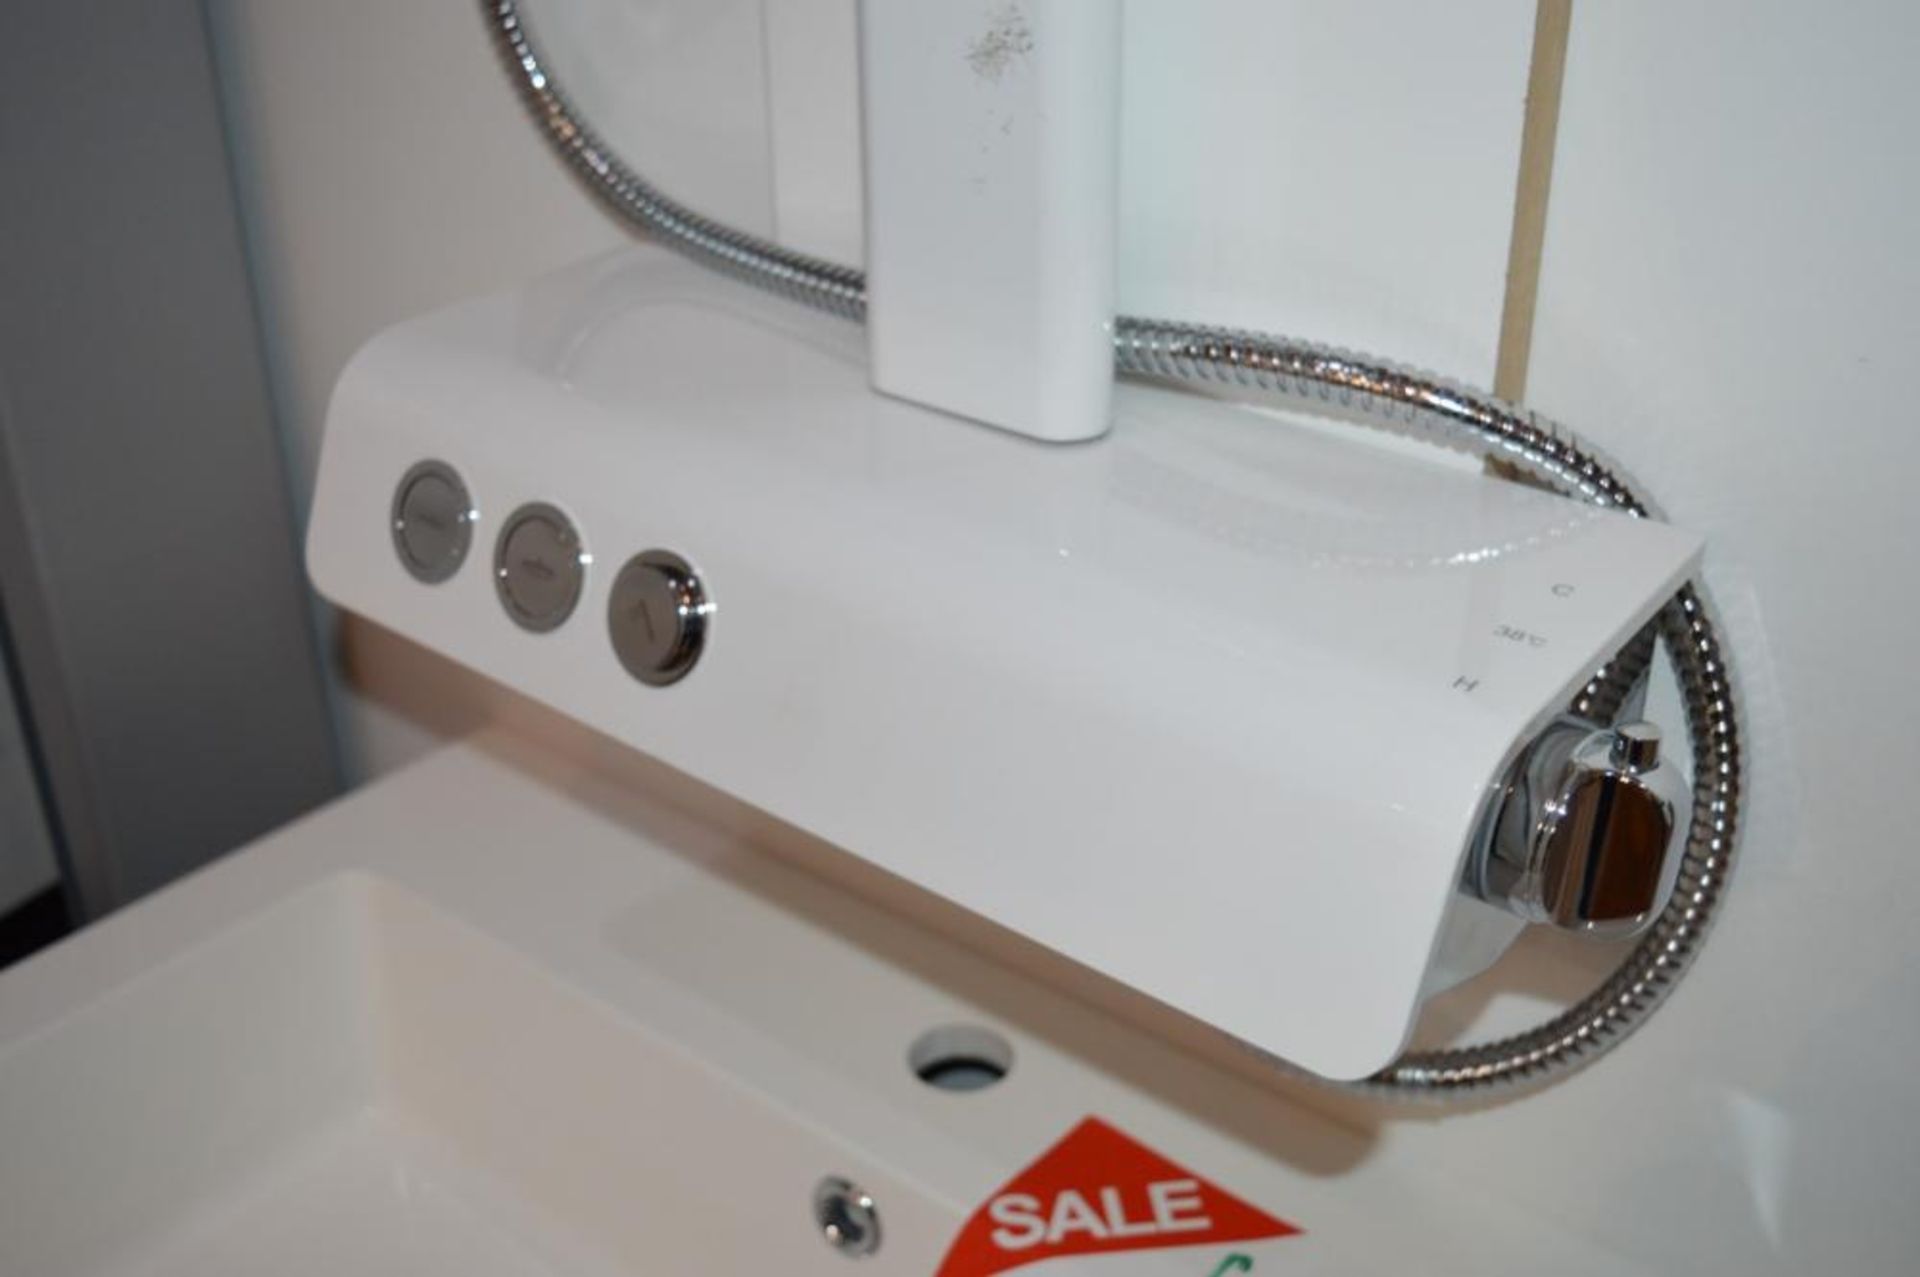 1 x Synergy Nubian Thermostatic Shower With Fixed Head and Handset - White Finish - Height 120cm - C - Image 6 of 6